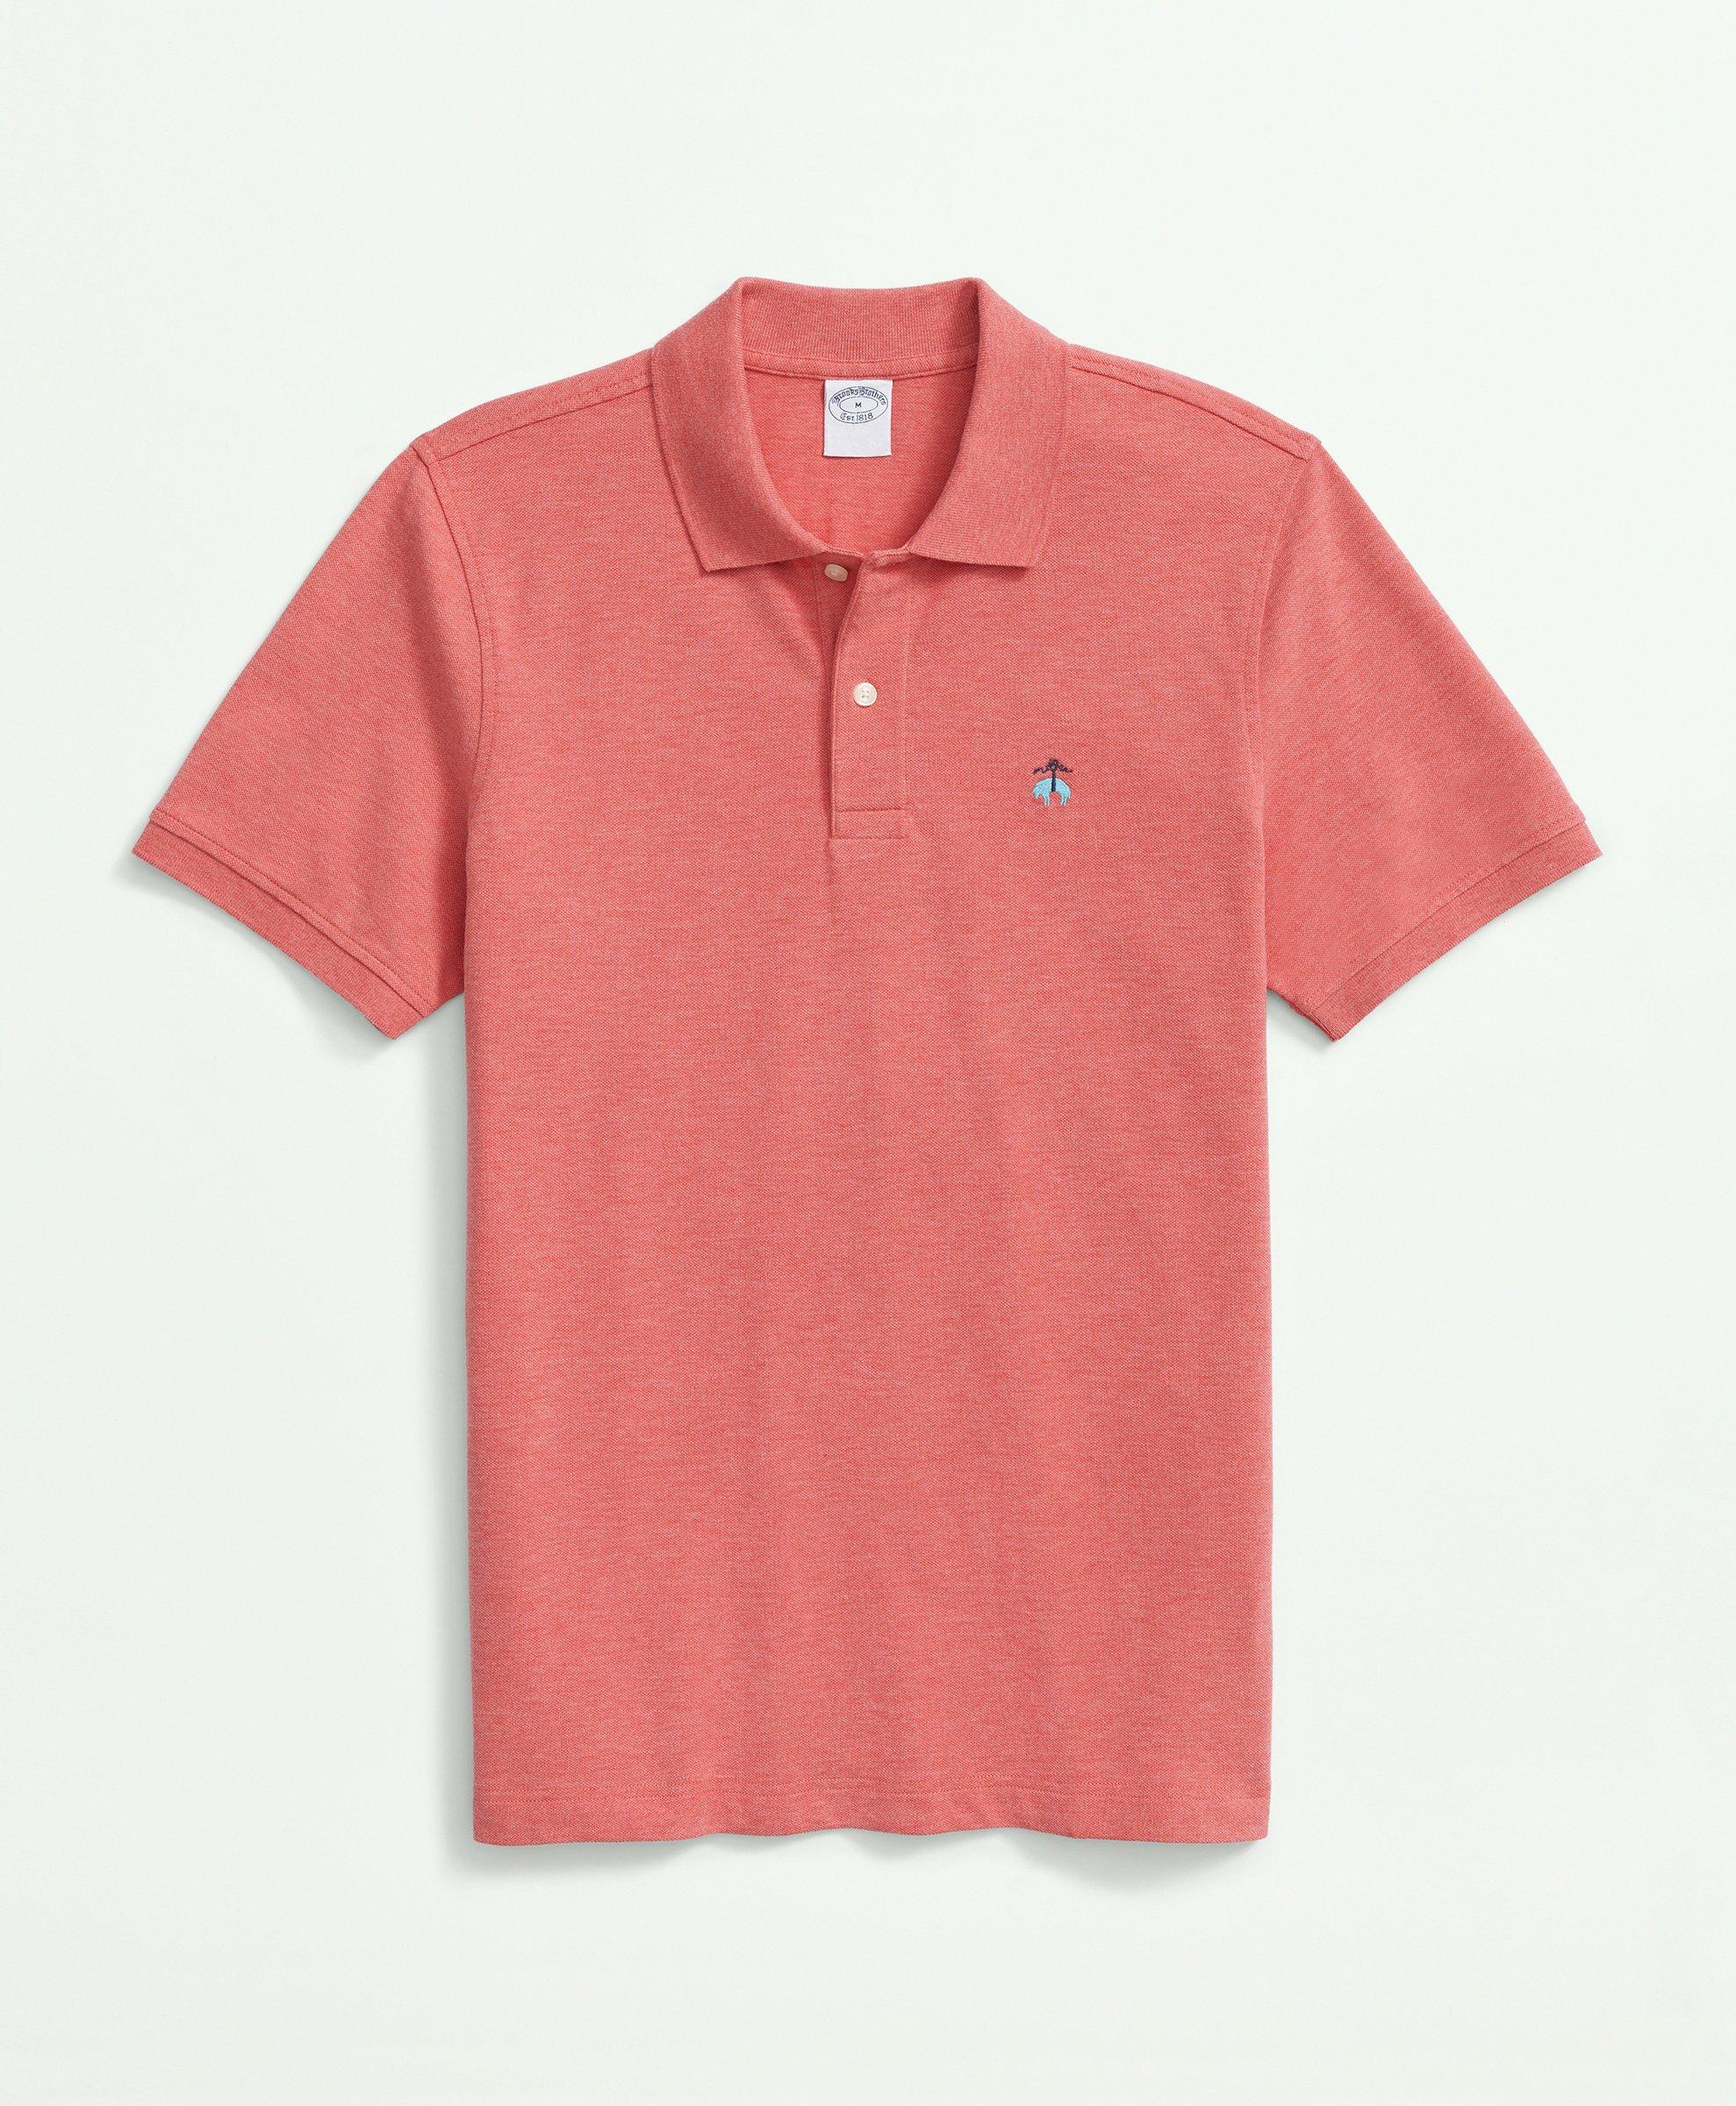 Brooks Brothers Golden Fleece Stretch Supima Polo Shirt | Red Heather | Size Small